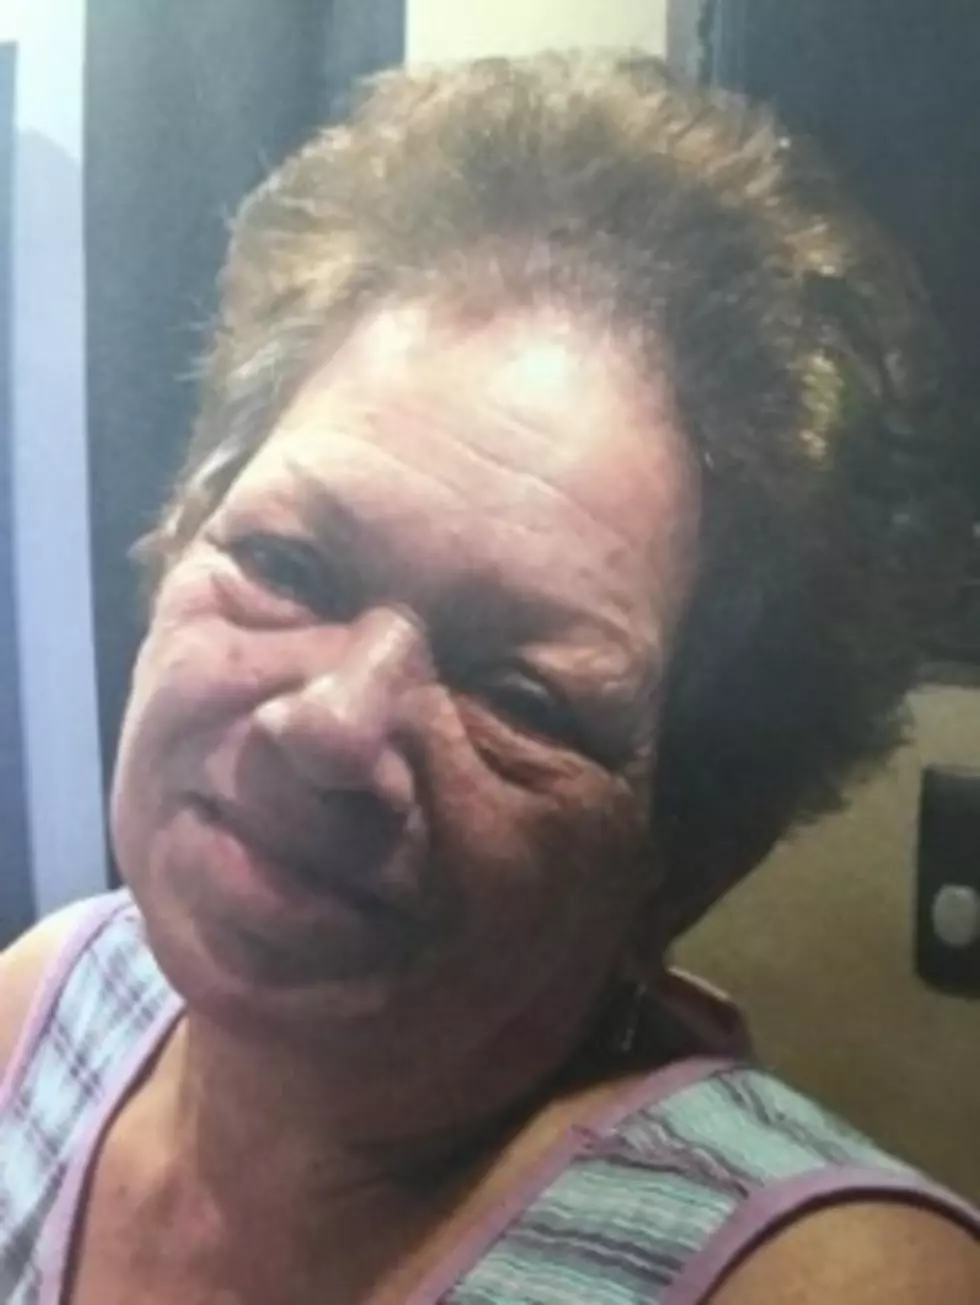 Search underway for missing Brick Township woman with dementia